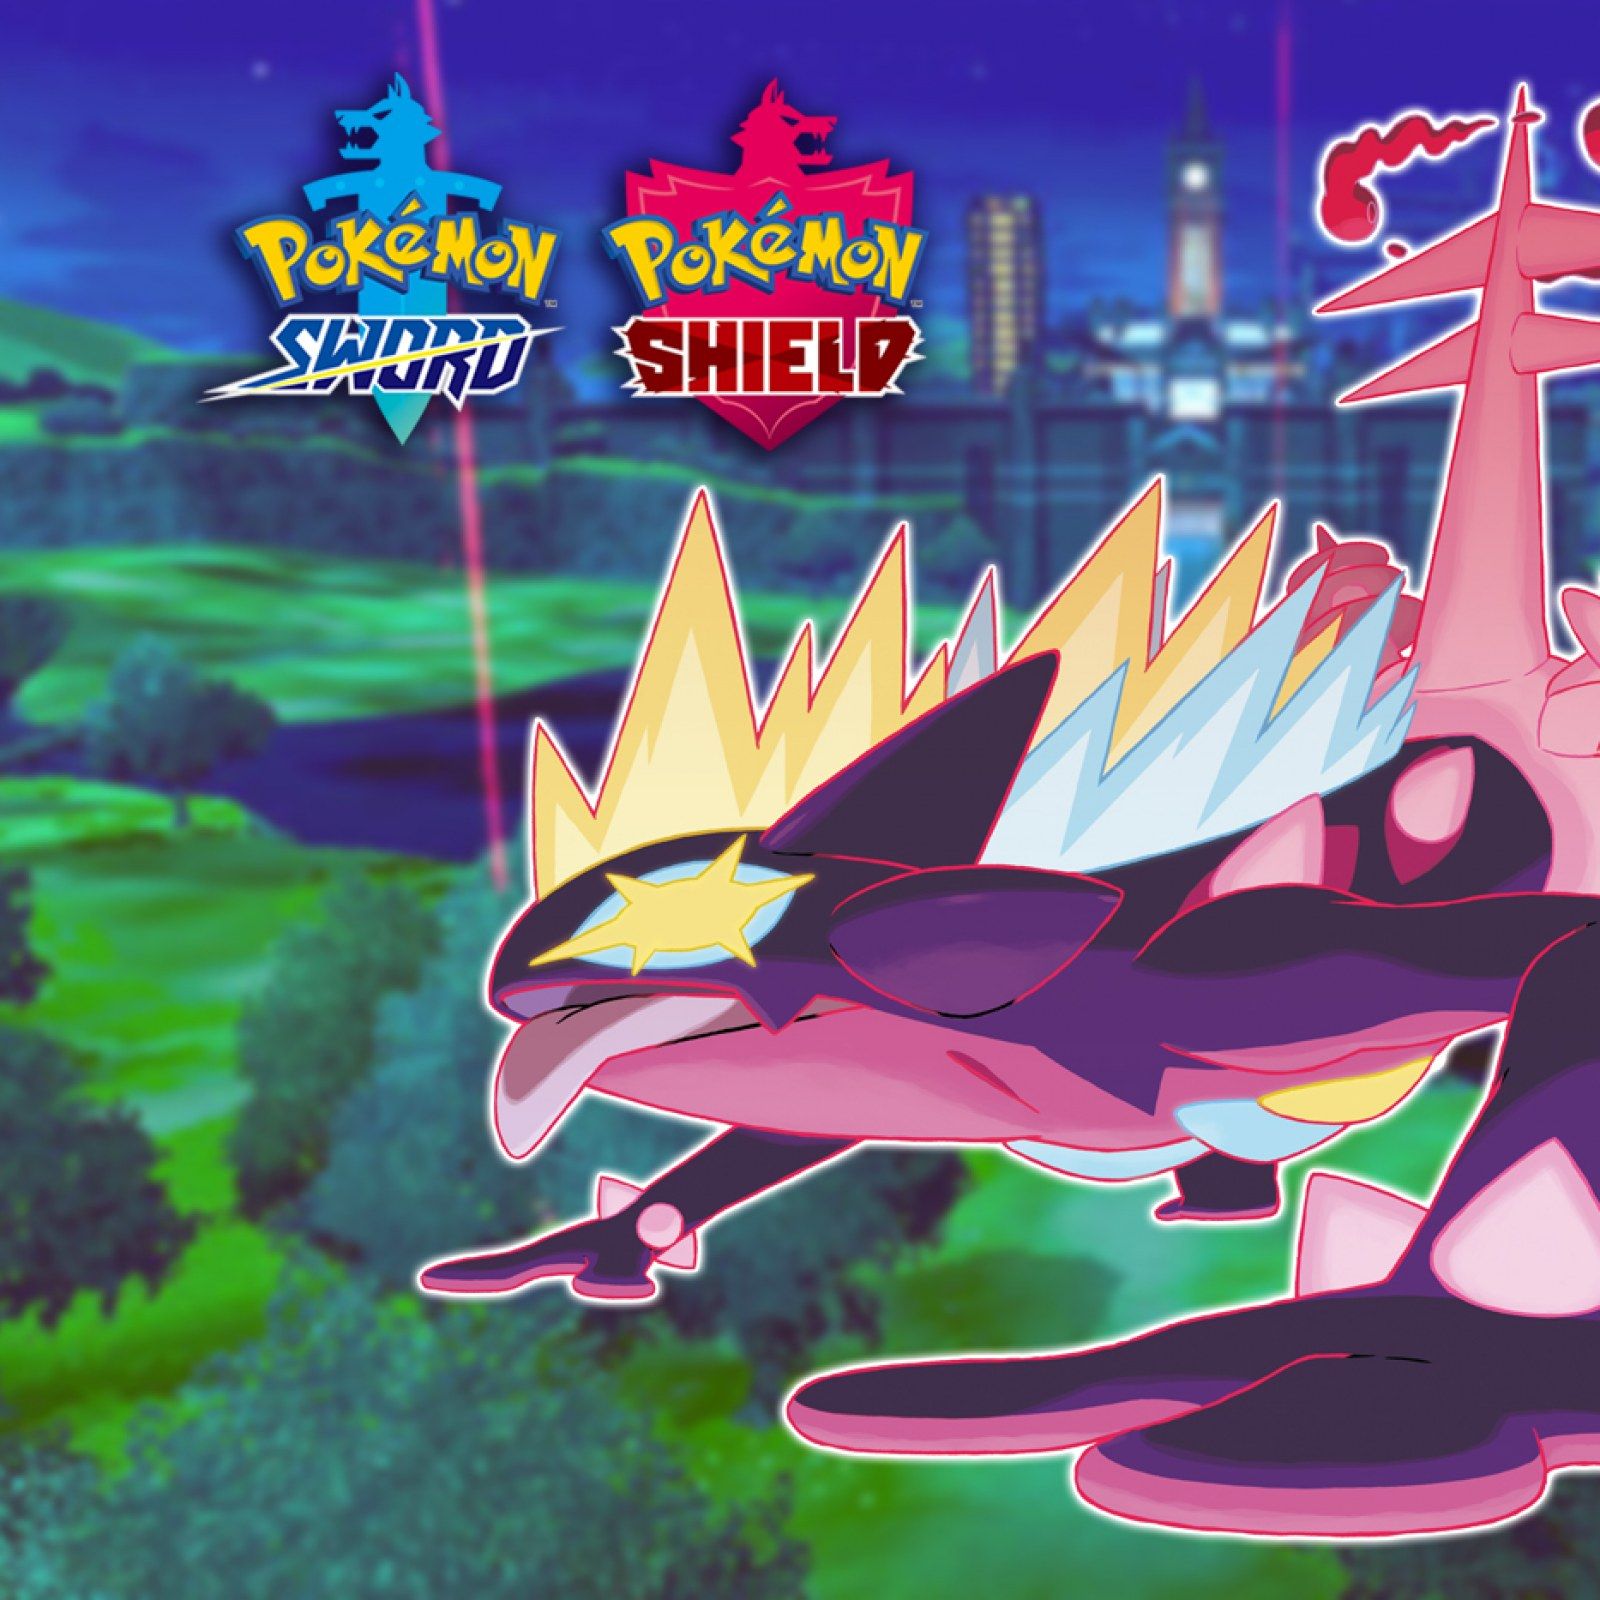 Pokémon Sword and Shield' Gigantamax Toxtricity Max Raid Event: Start Time & Everything We know